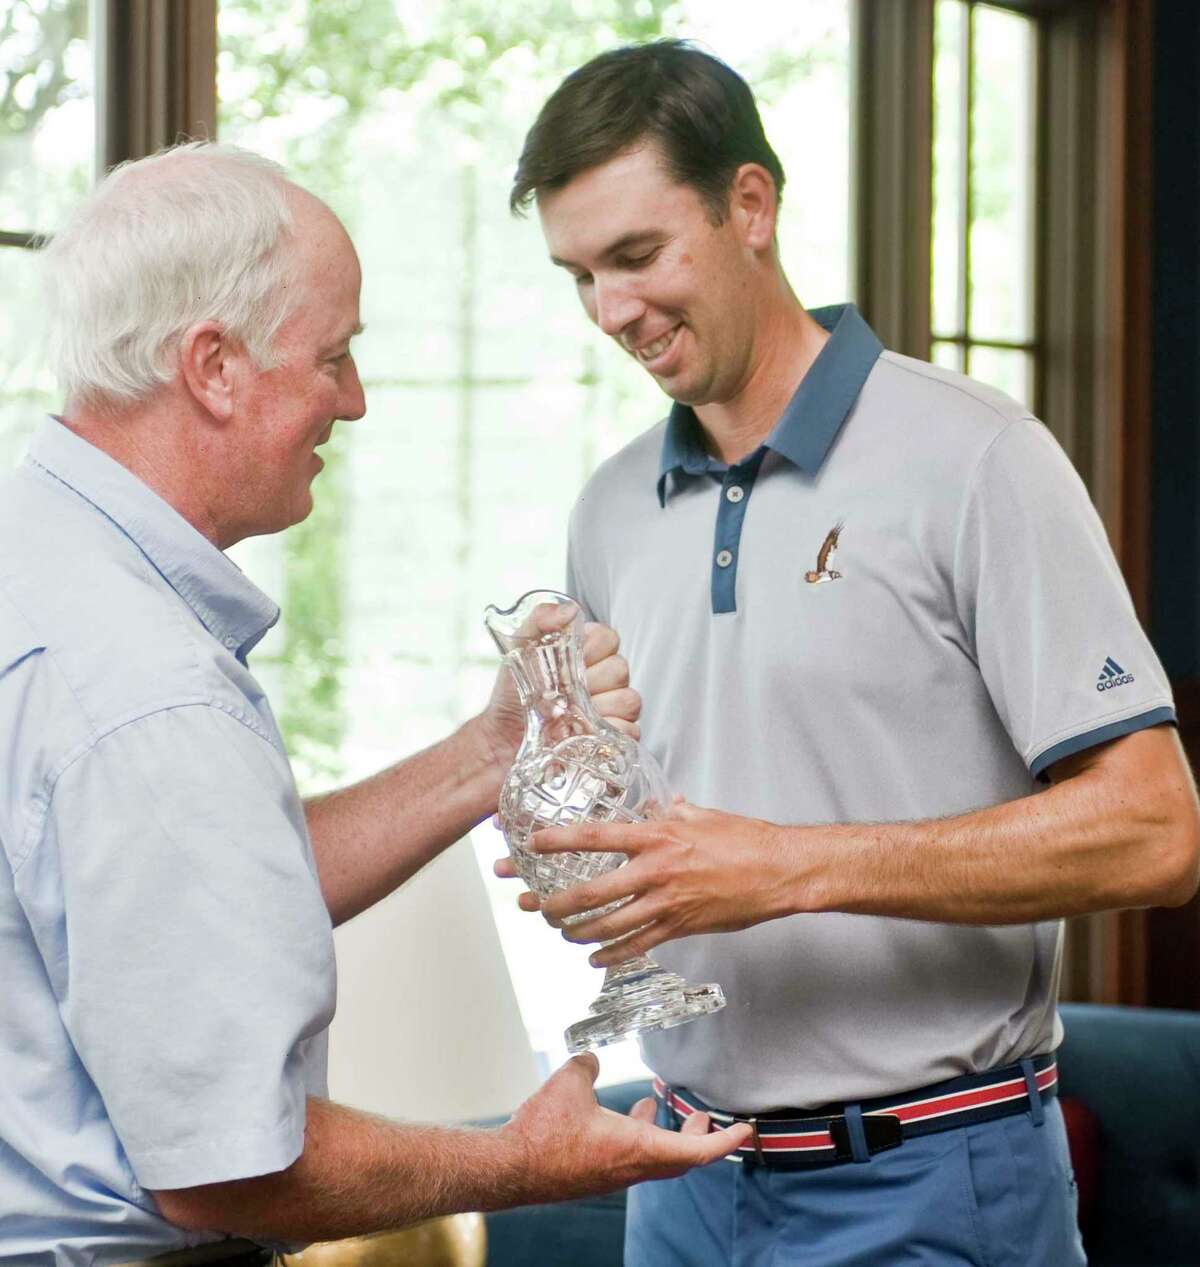 President of the Connecticut State Golf Association Mike Moraghan presents the trophy to Adam Rainaud at the 2016 Connecticut Open.